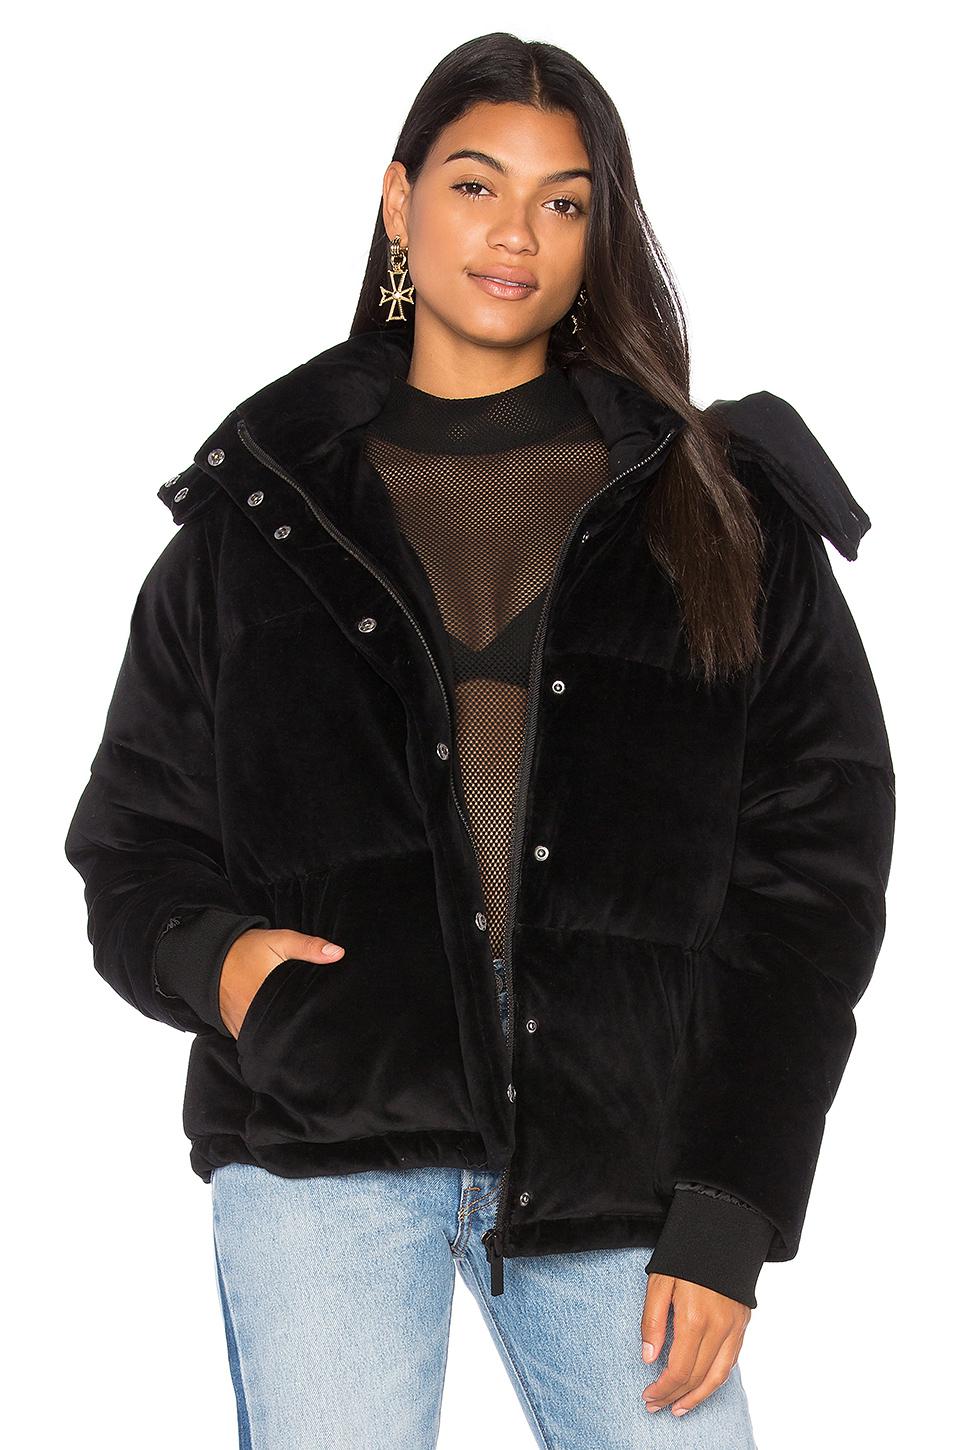 Kendall + Kylie Velour Puffer Jacket in Black - Lyst